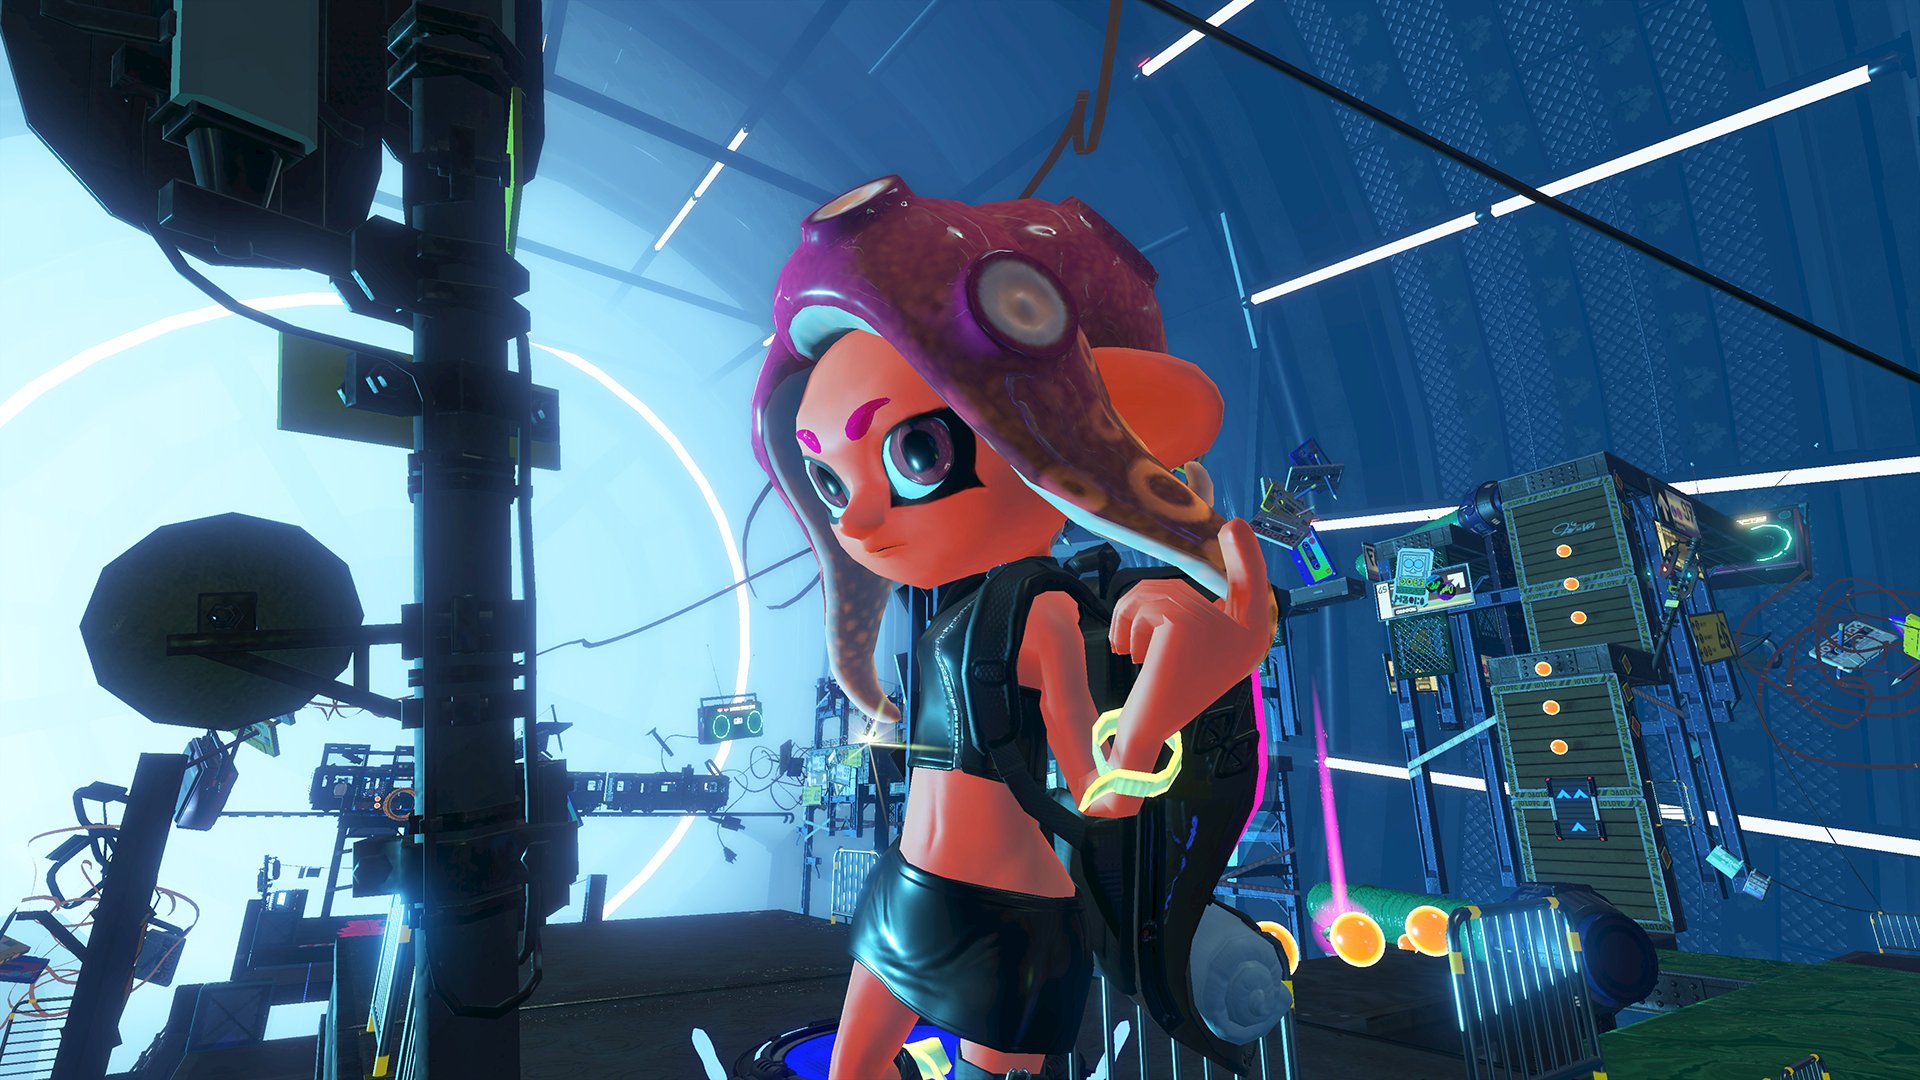 Splatoon 2's Octo Expansion DLC gets a surprise release tomorrow